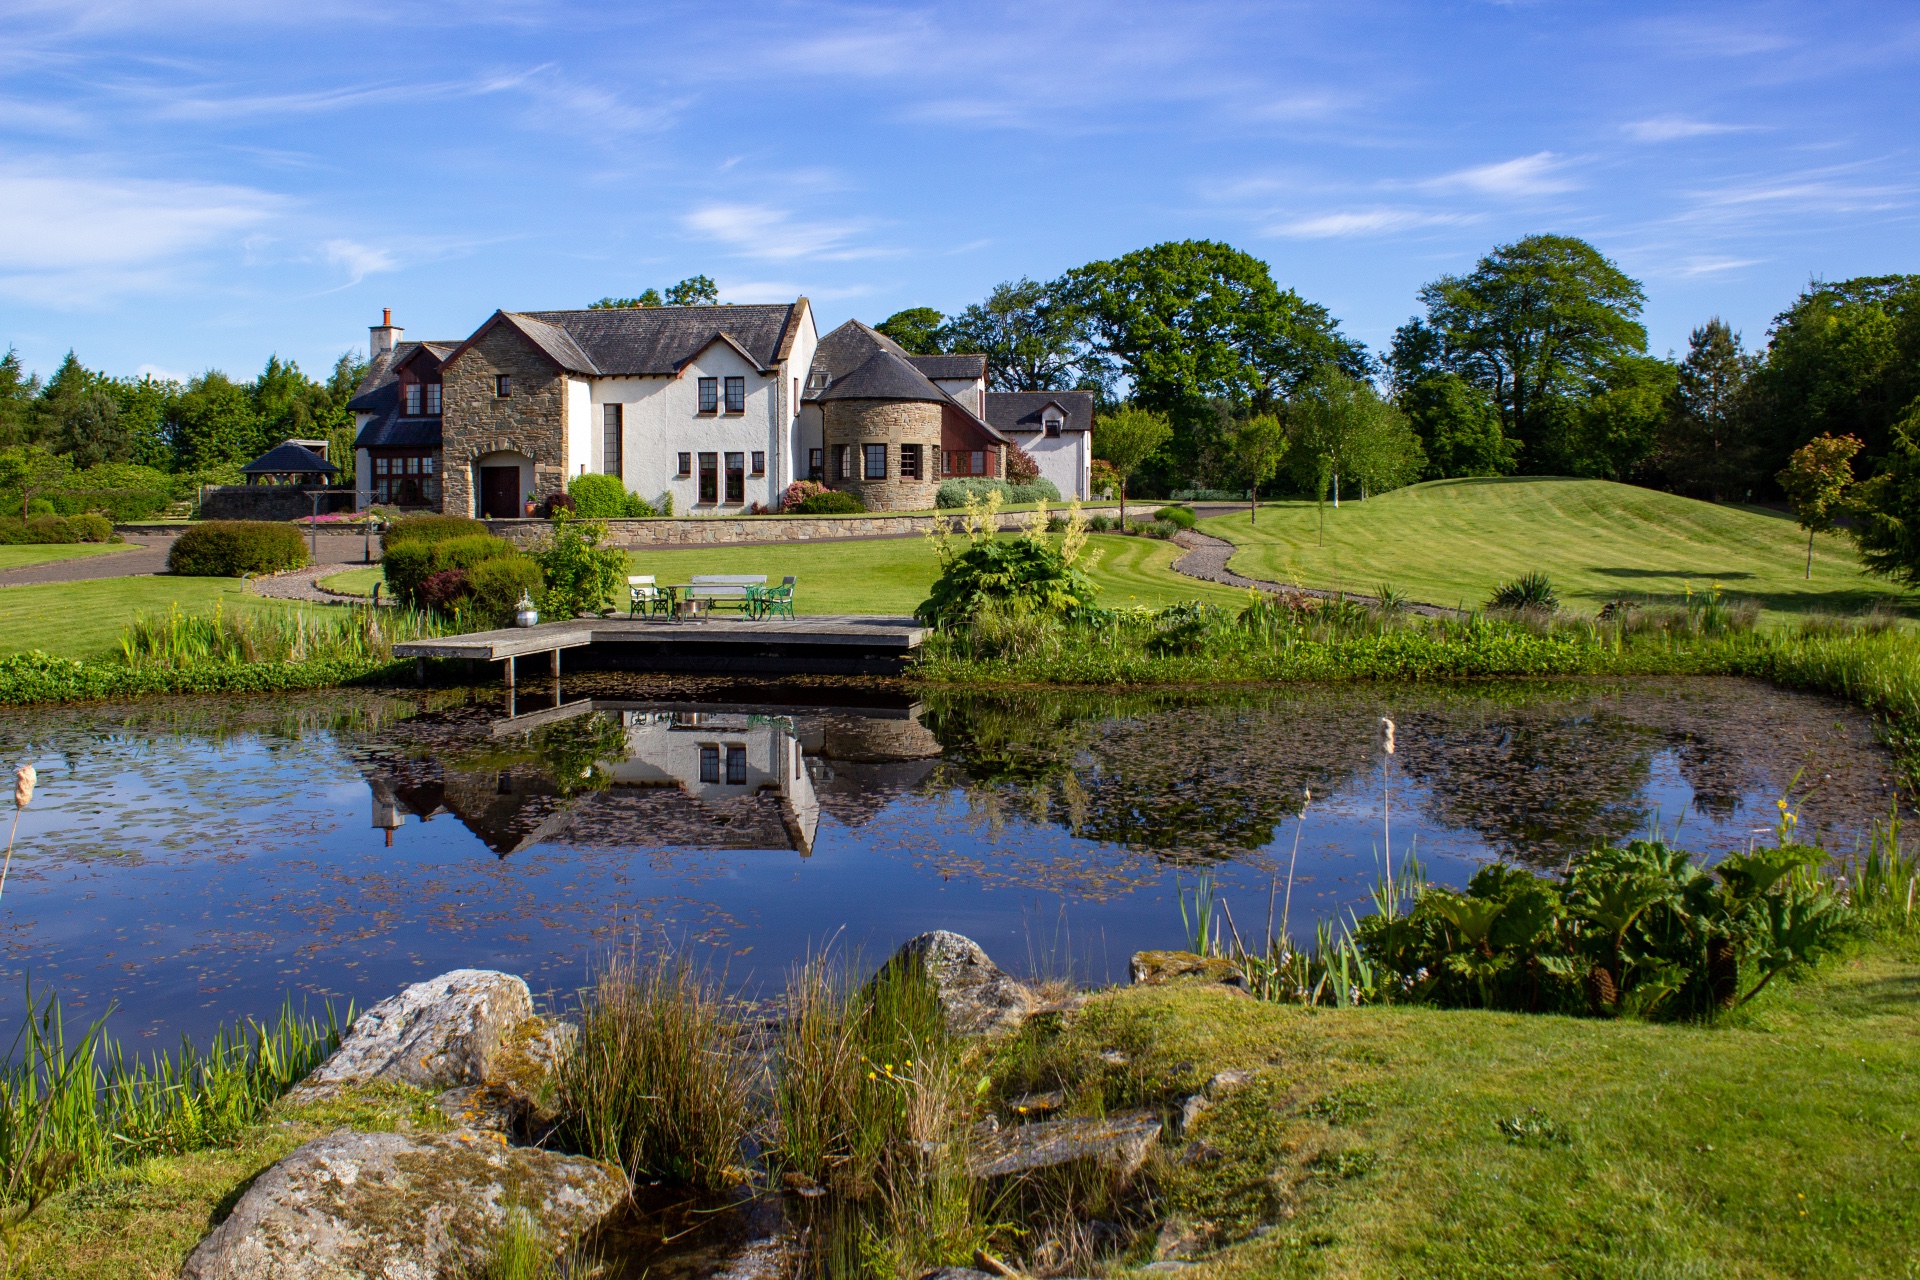 A Striking Scottish Home Near Dundee That Has Been Designed By An Award-Winning Architect